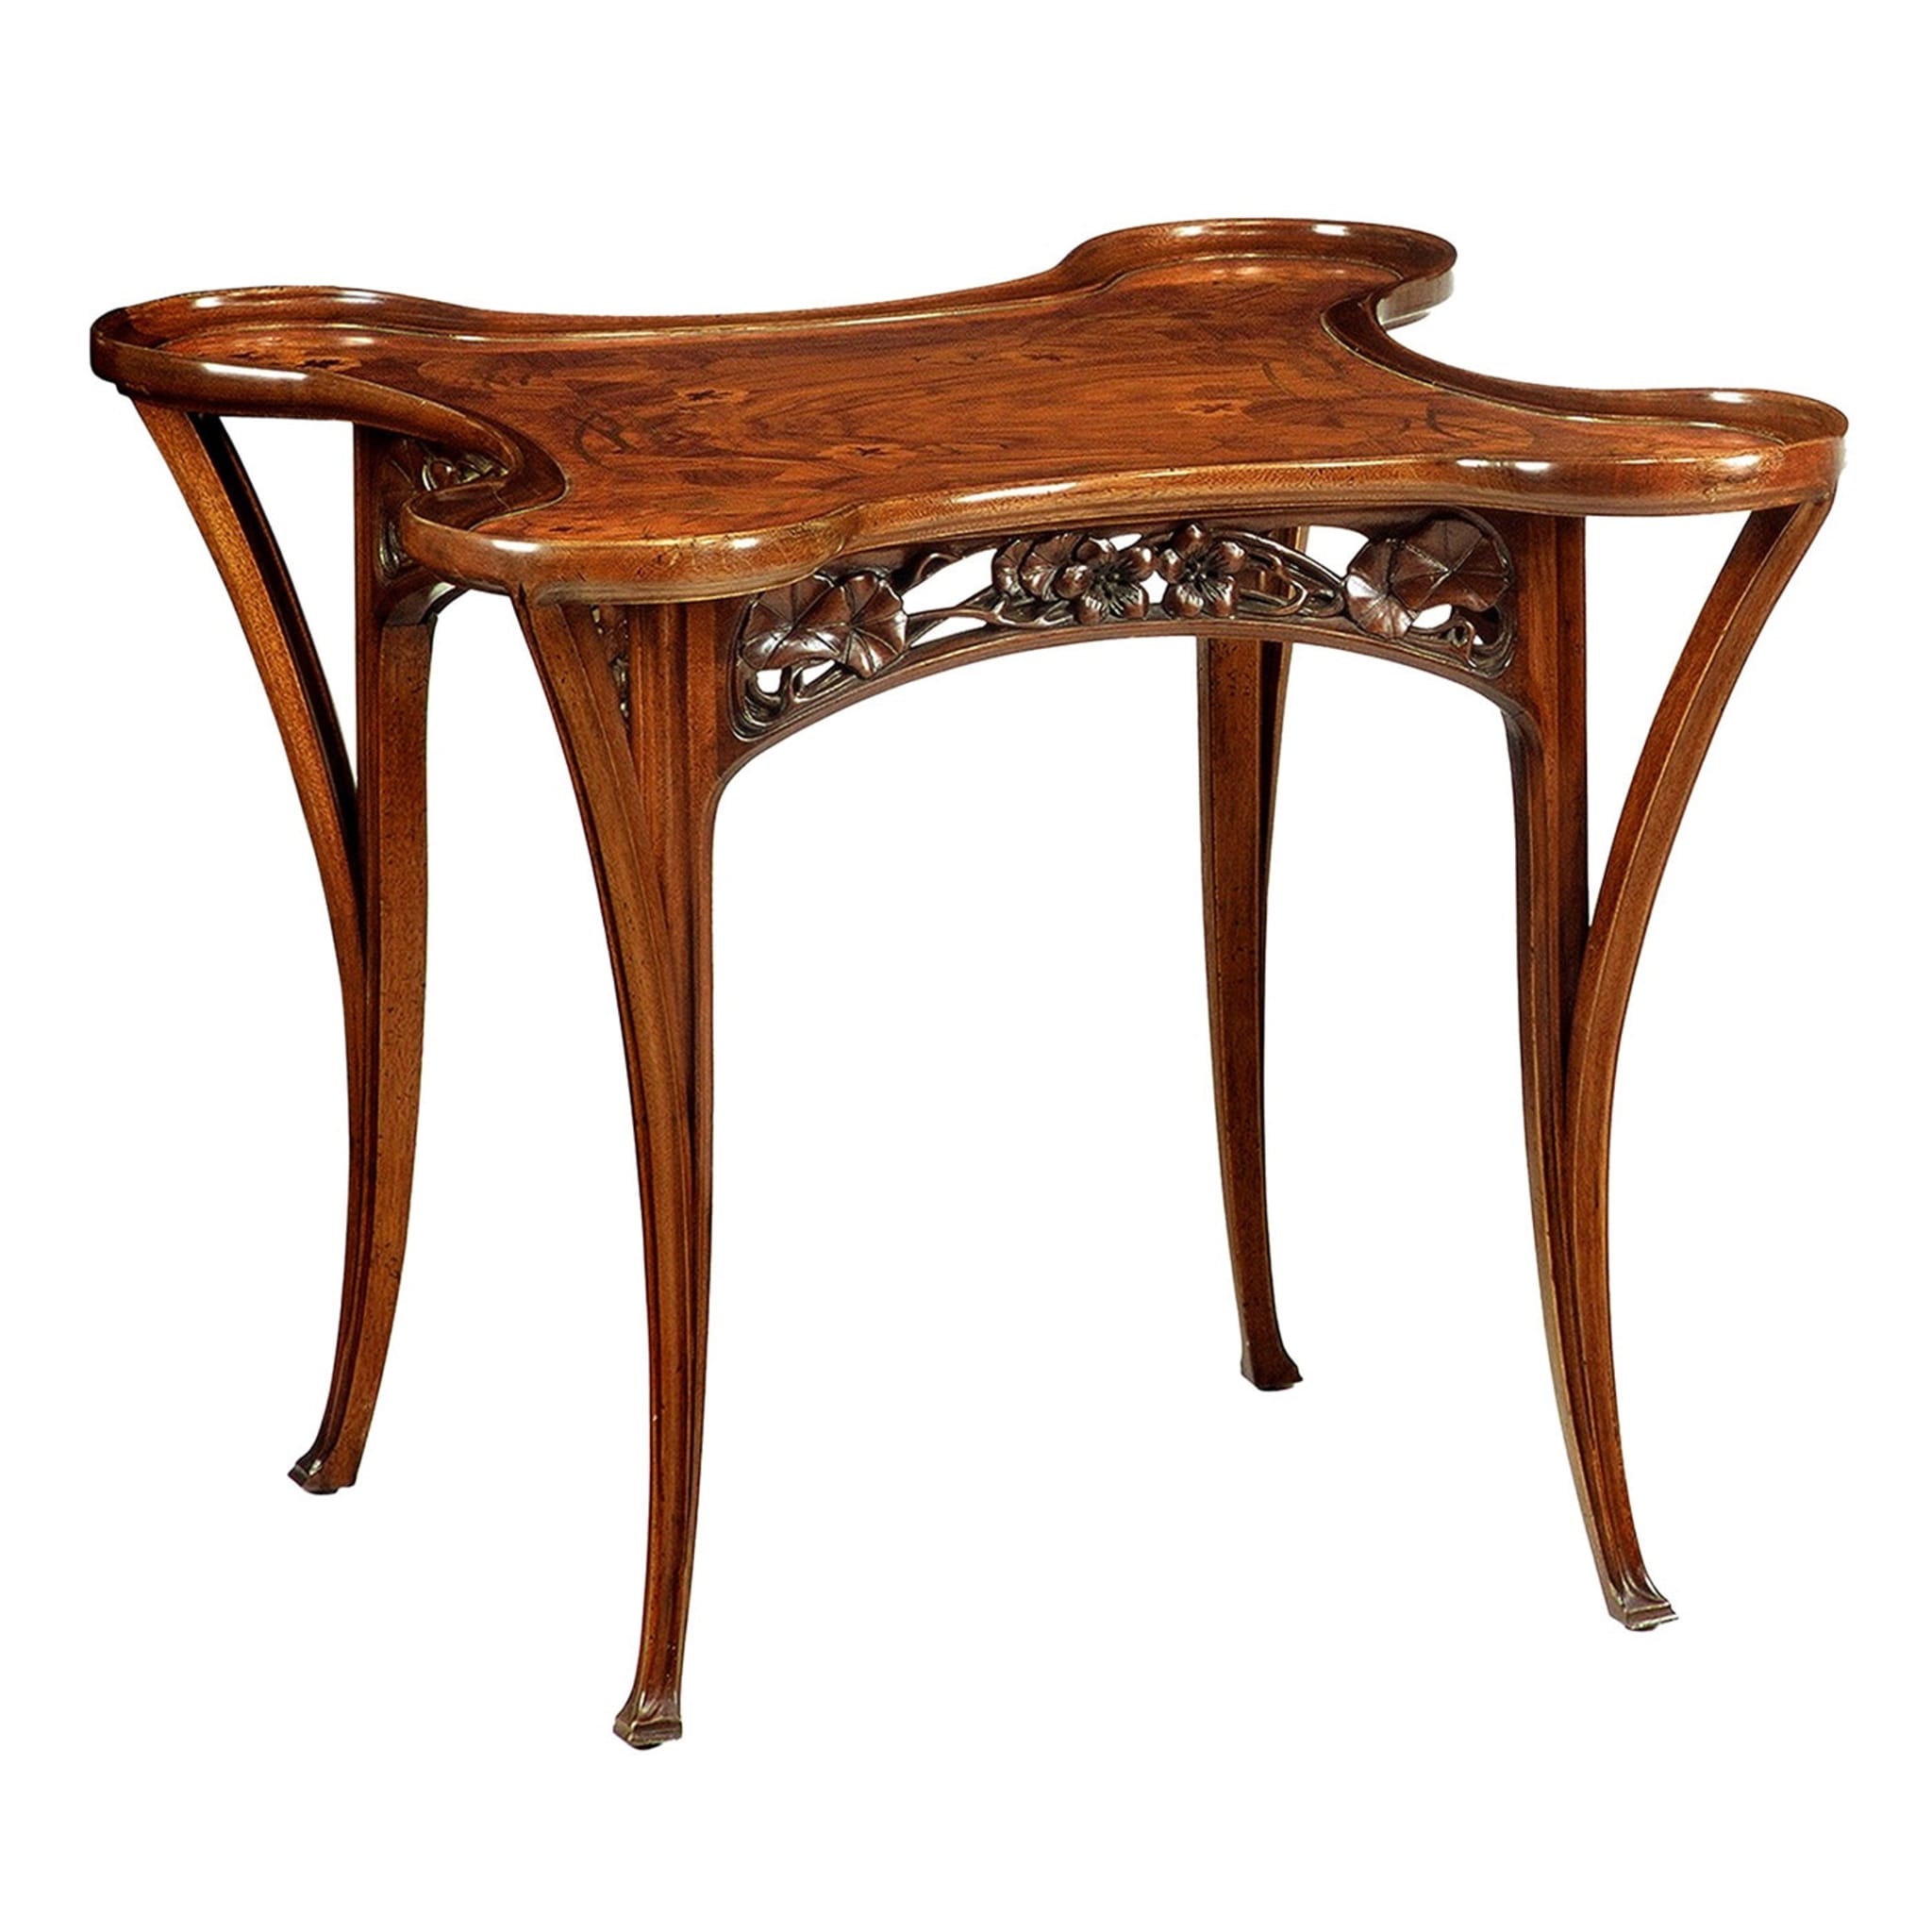 French Art Nouveau-Style Shaped Side Table by Louis Majorelle - Main view